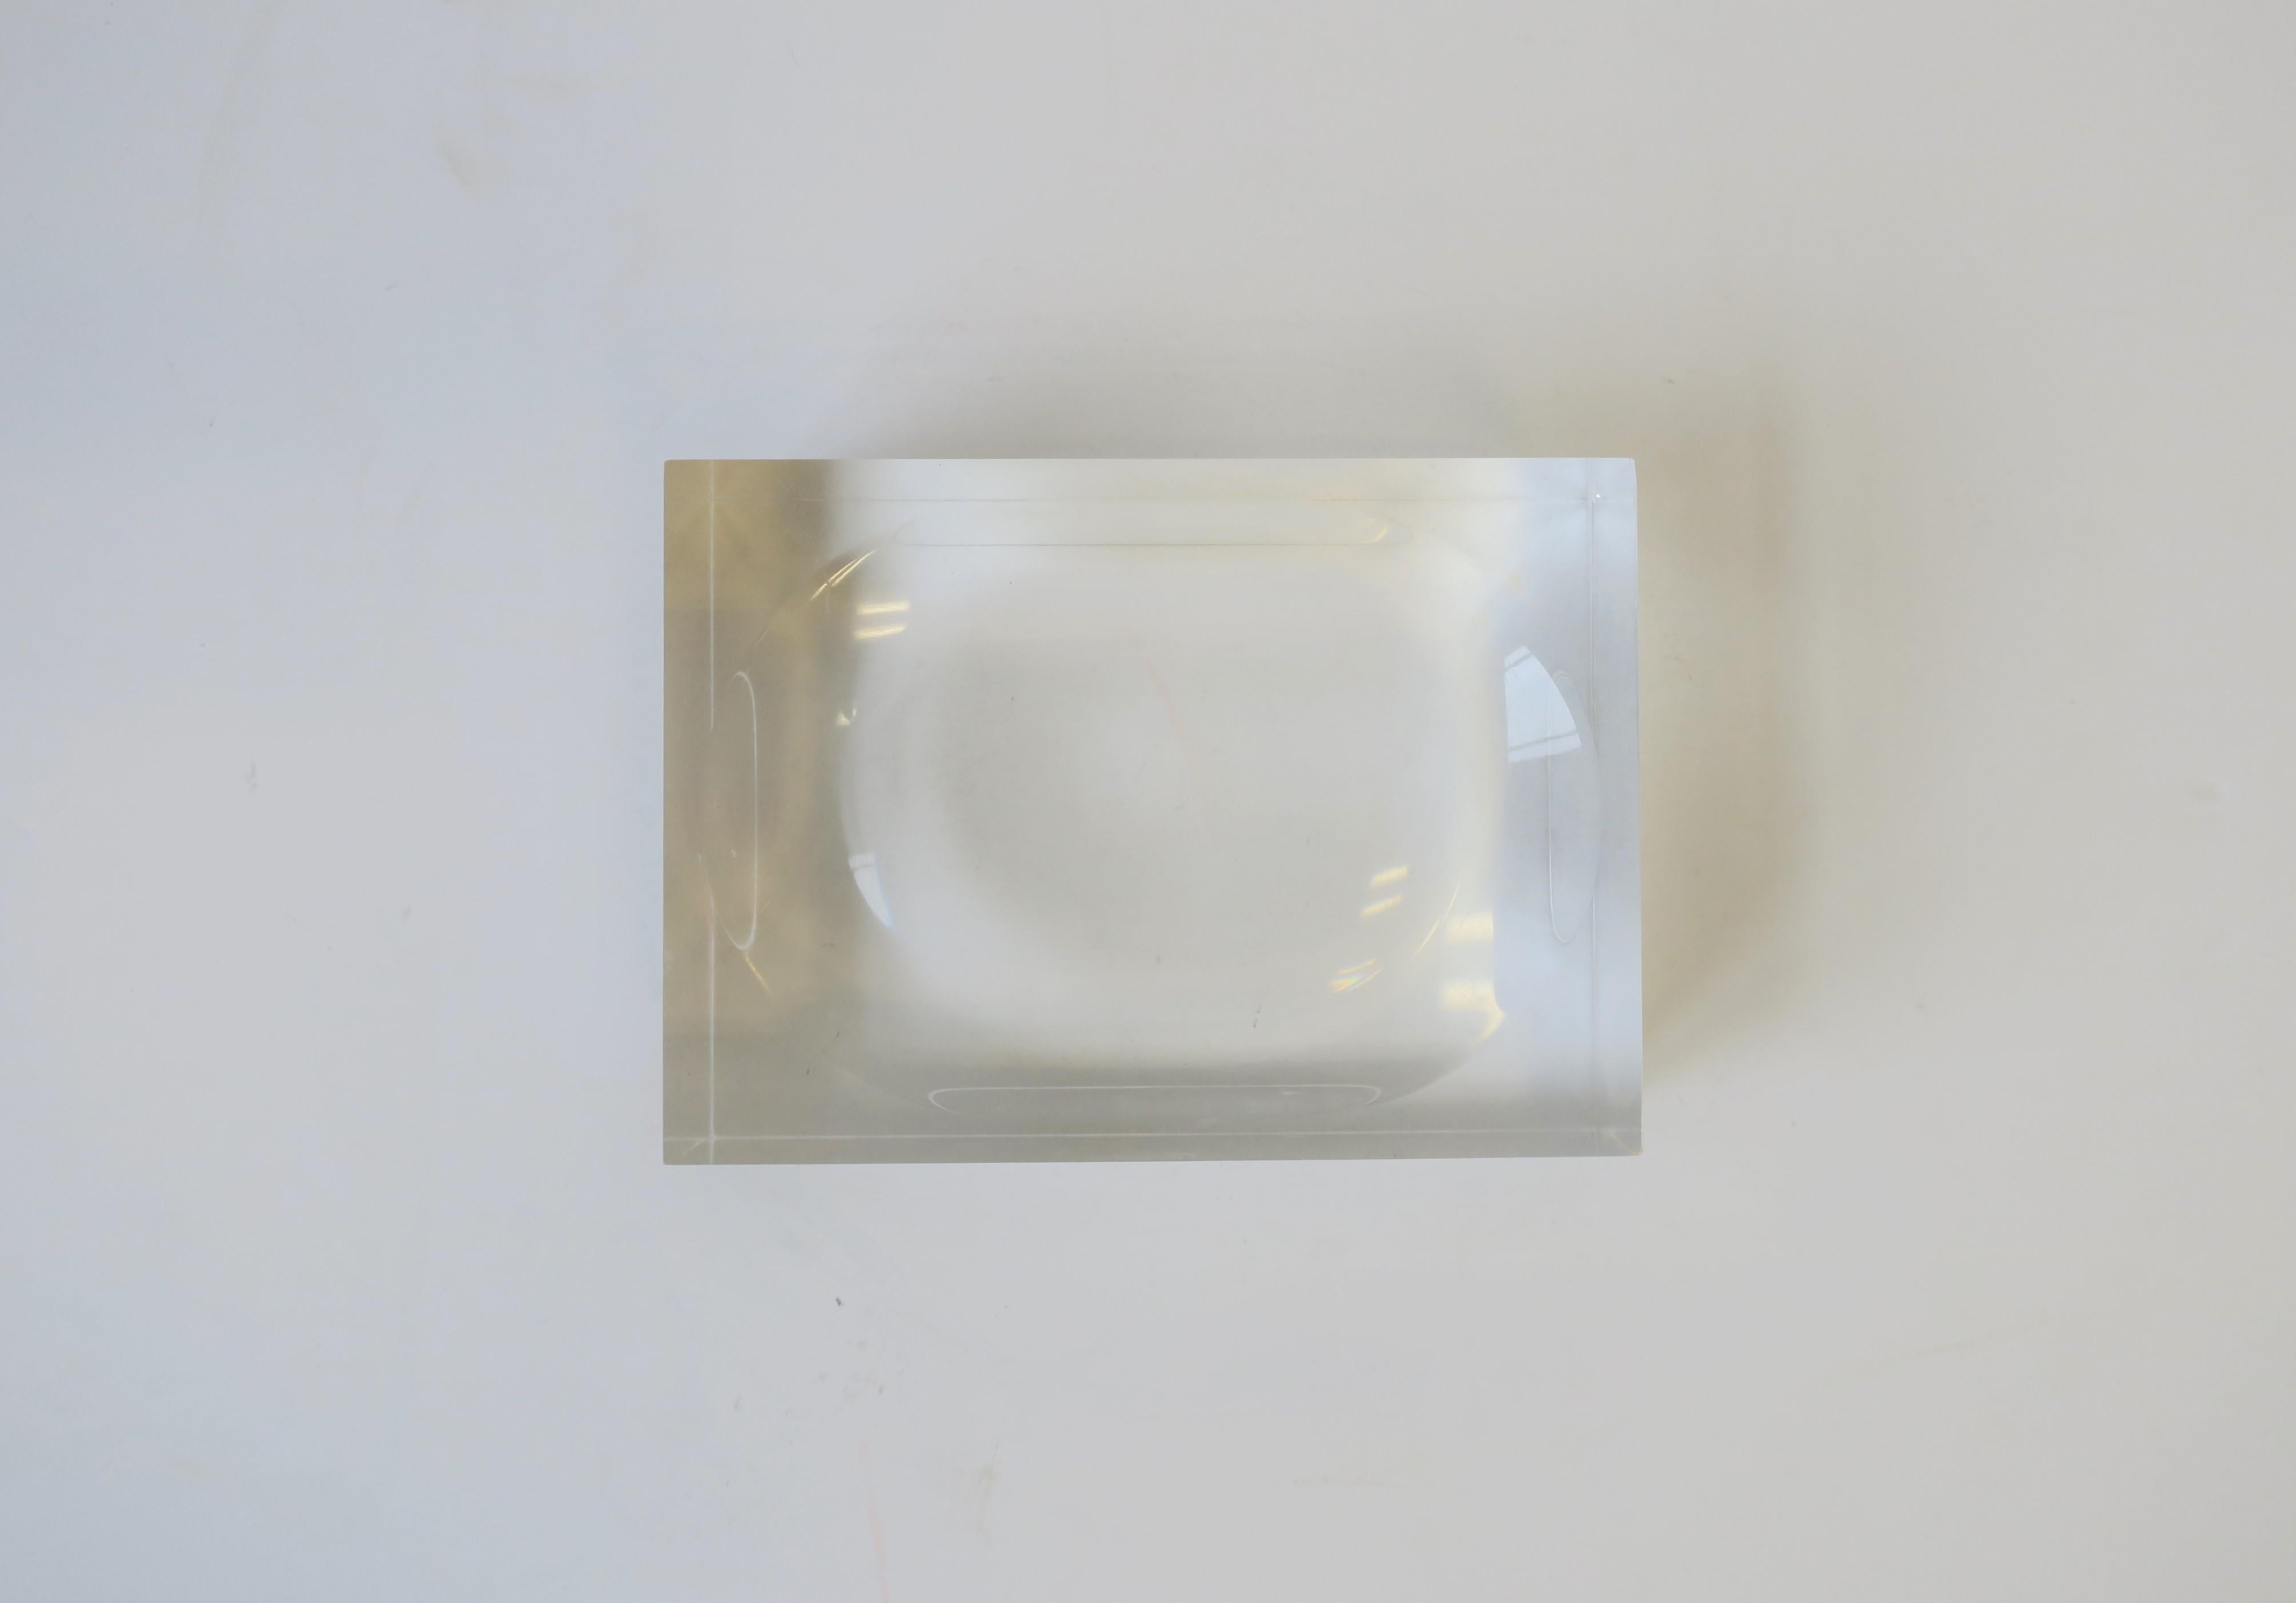 A thick Lucite soap dish; fits a standard size bar of soap or smaller.